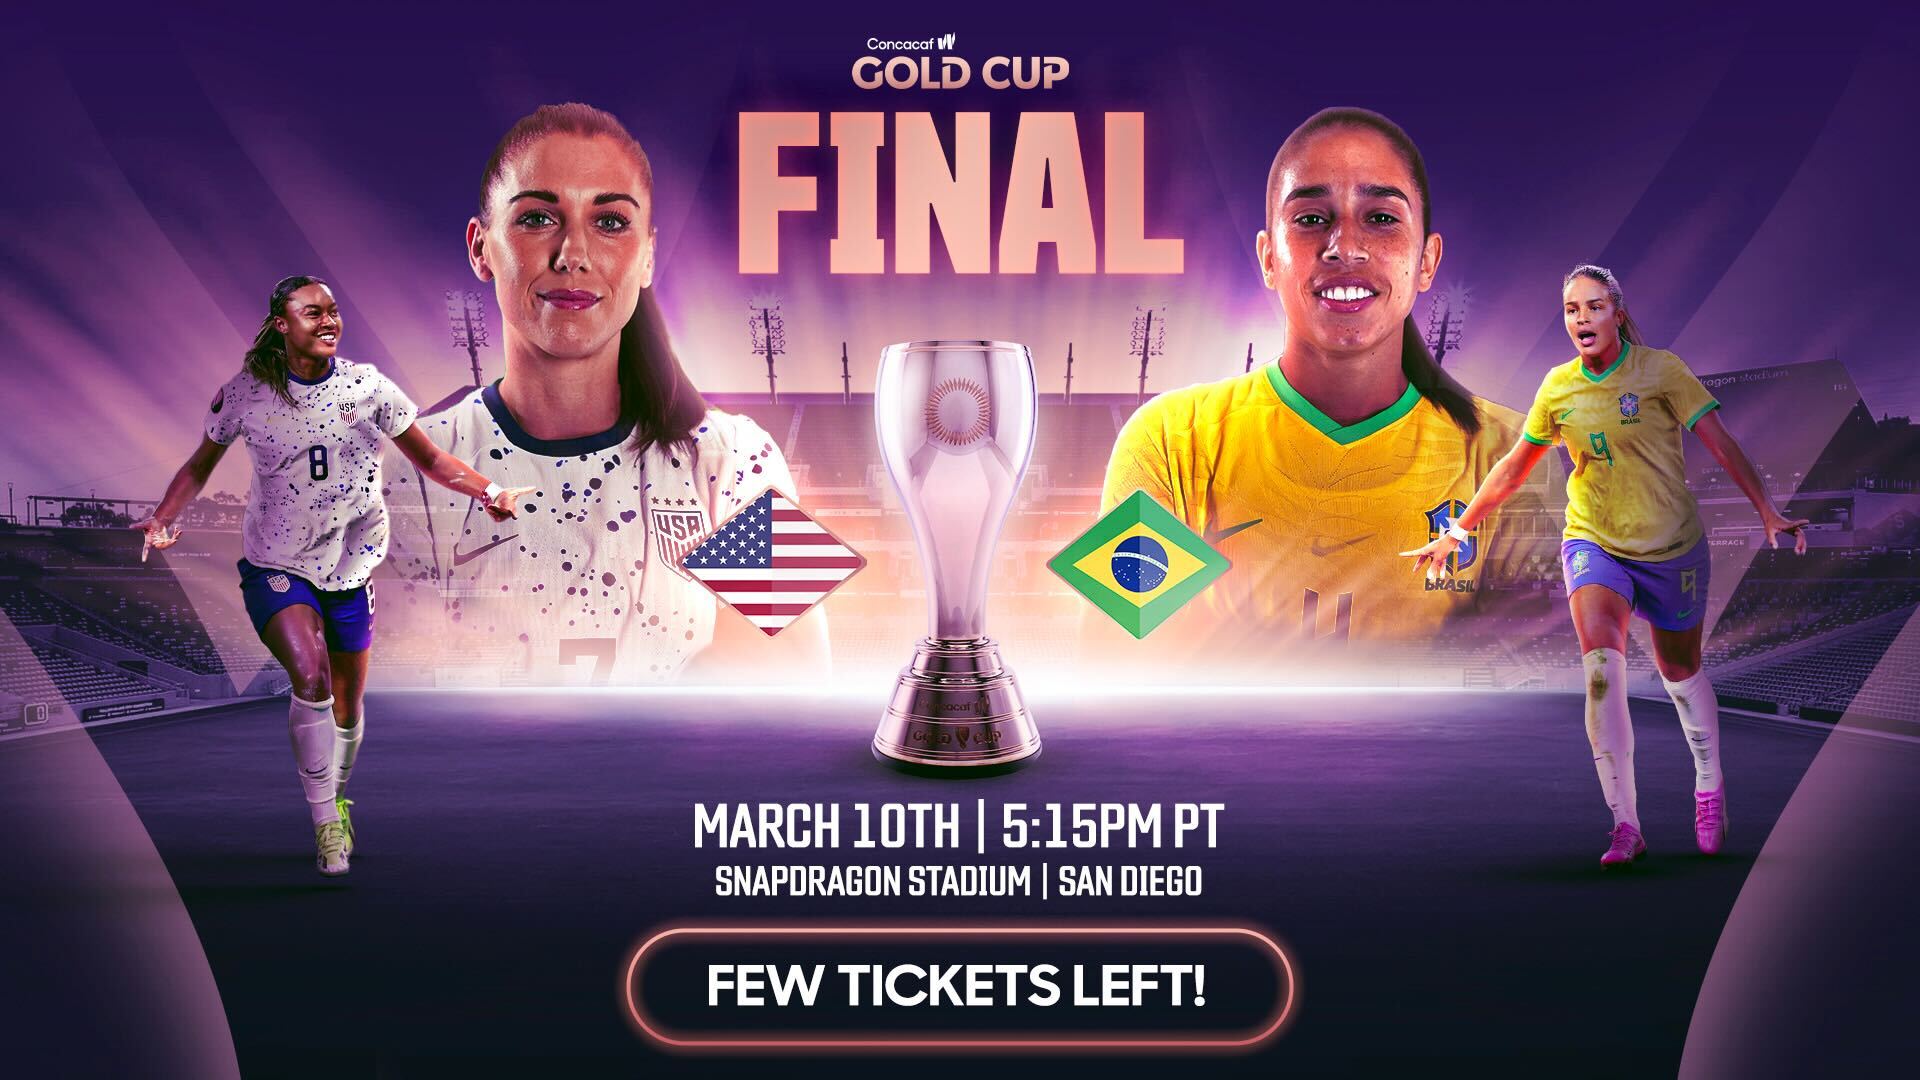 Close to 30,000 tickets sold for 2024 Concacaf W Gold Cup Final at  Snapdragon Stadium